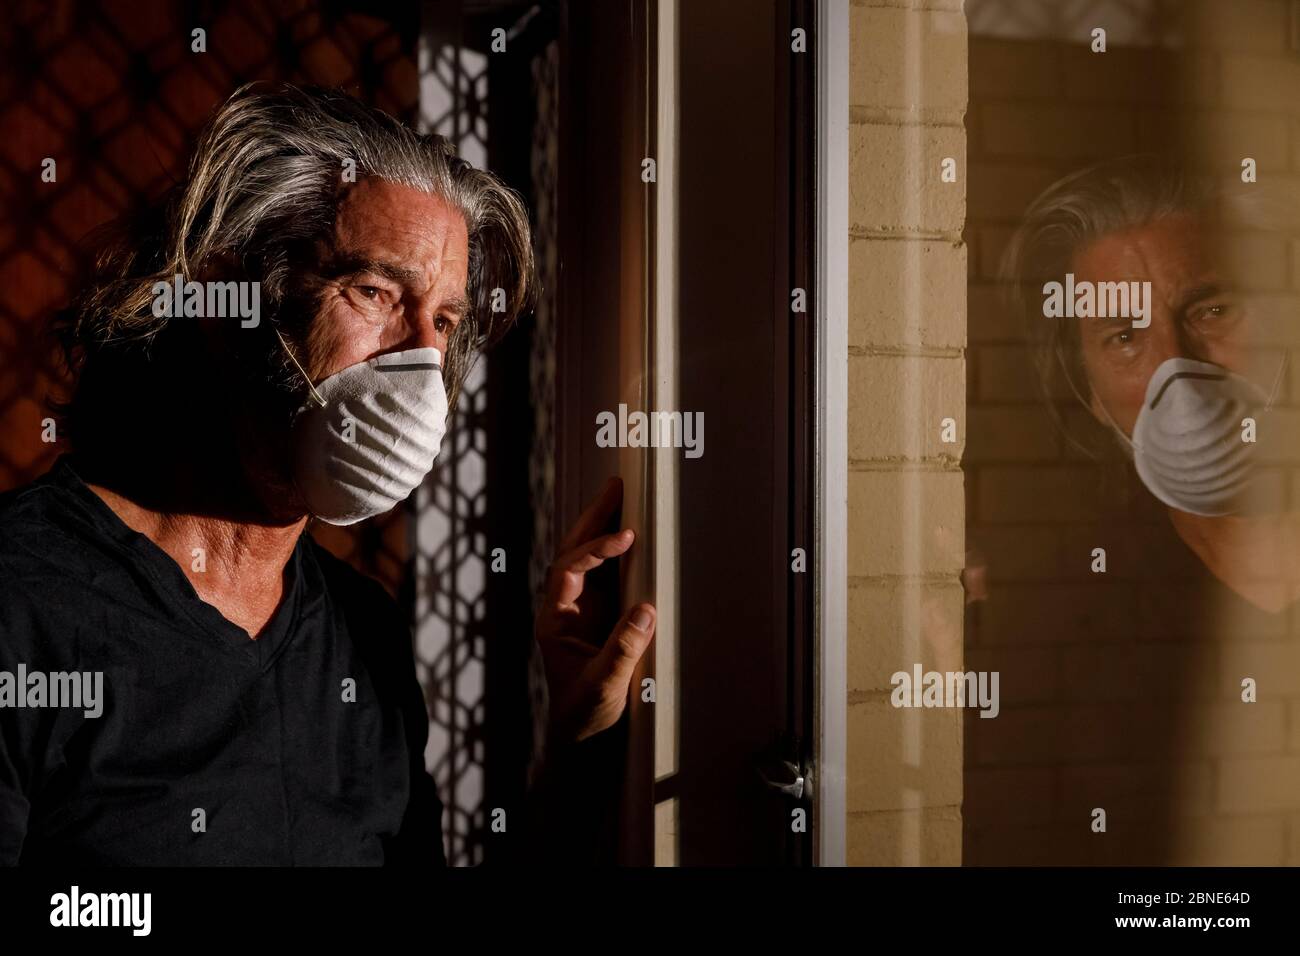 coronavirus crying male medical mask quarantine self isolation concept, depressed distraught mans reflection in window with tears wearing medical mask Stock Photo